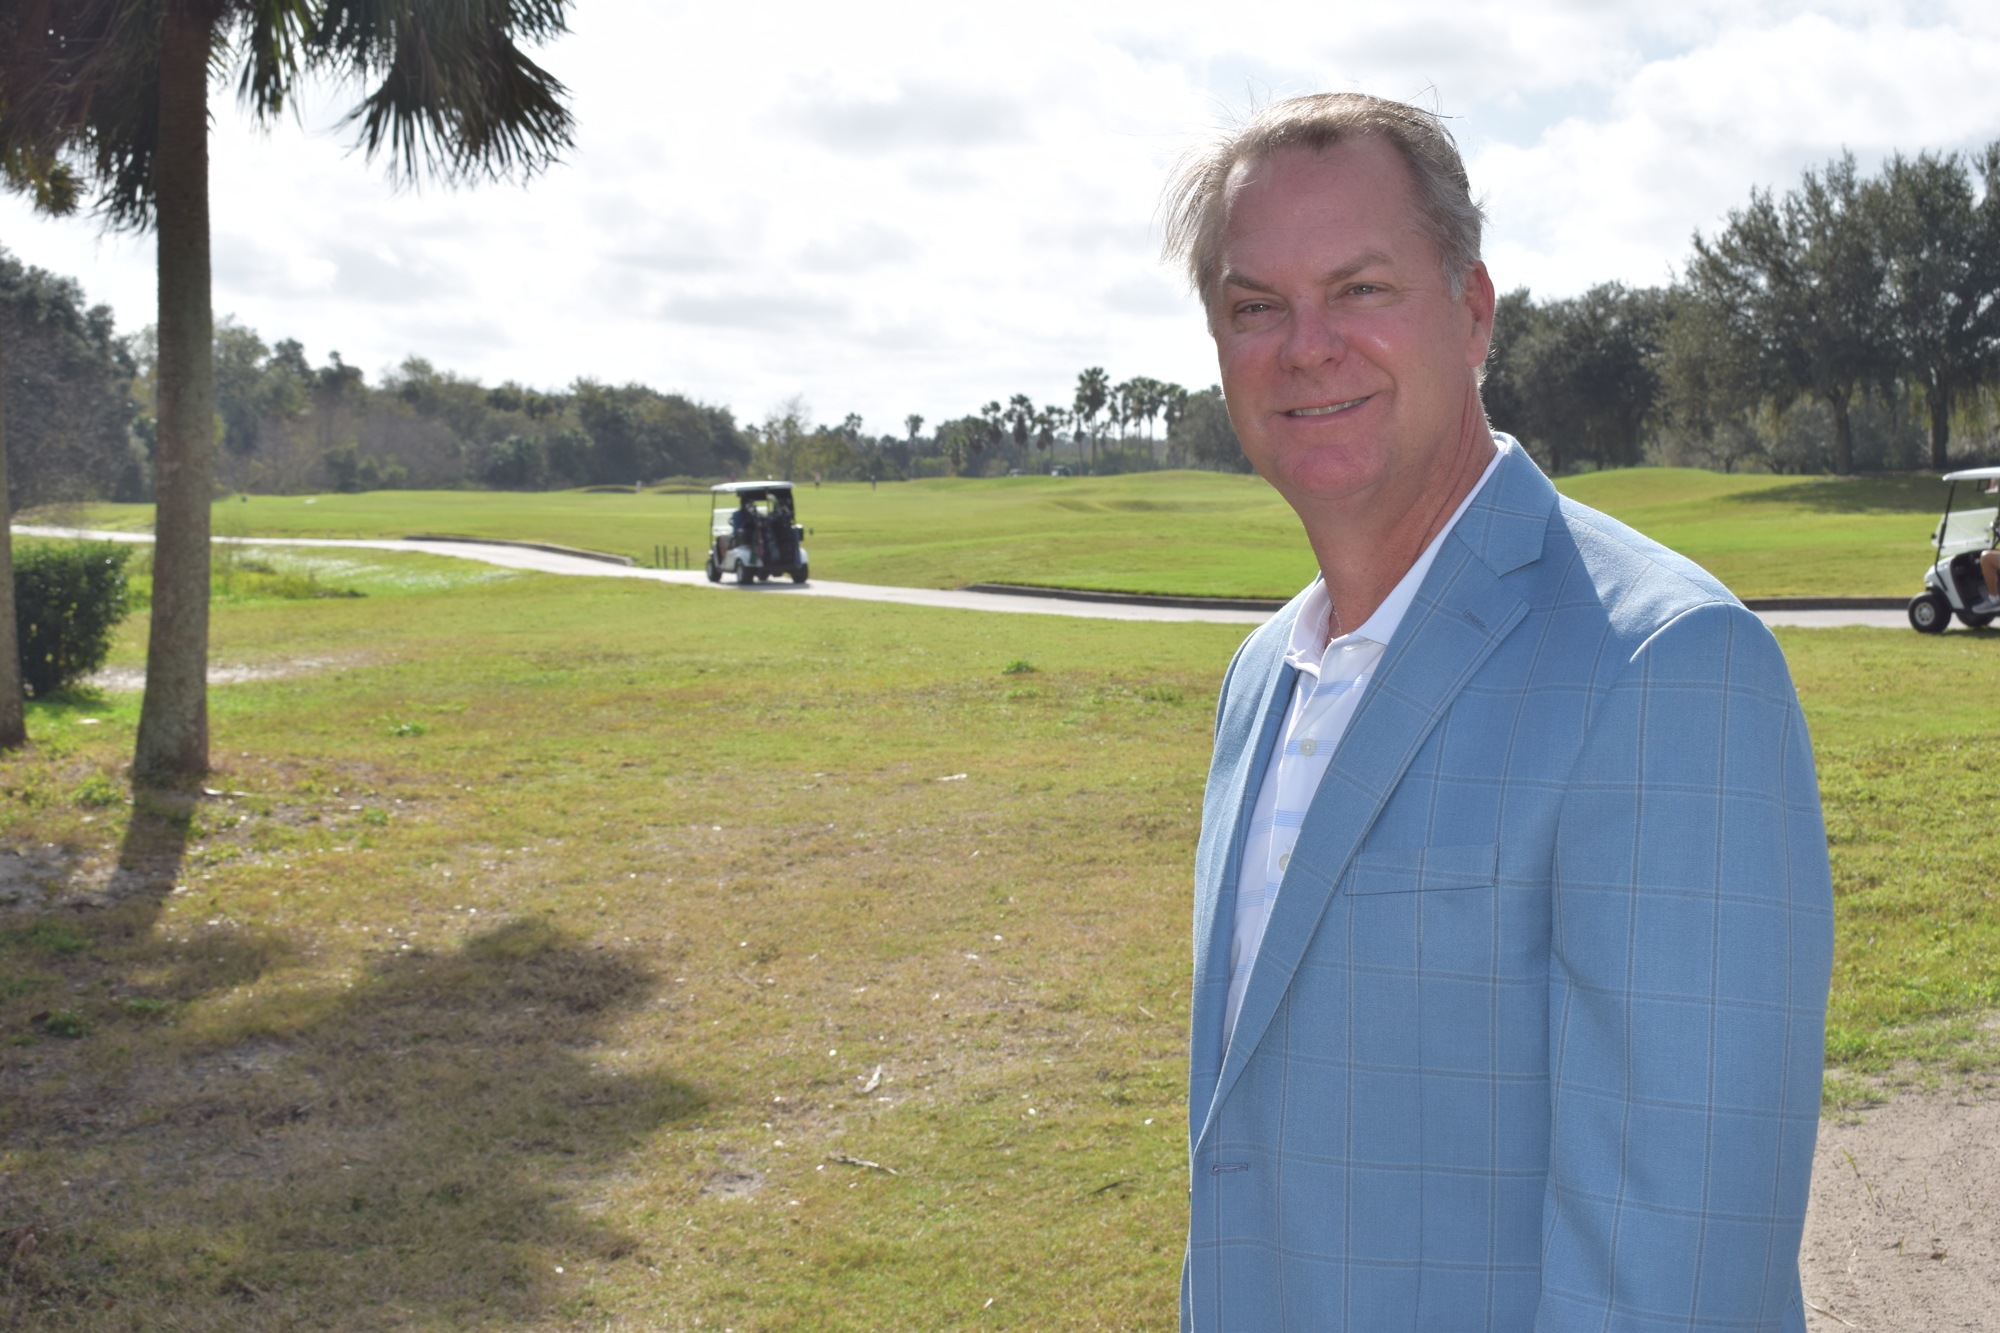 Mark Bruce, a principal owner along with Chris Bradshaw of the Heritage Harbour Golf Course & Eatery, says a plan to add resort amenities could help the course be financially successful in the longterm.